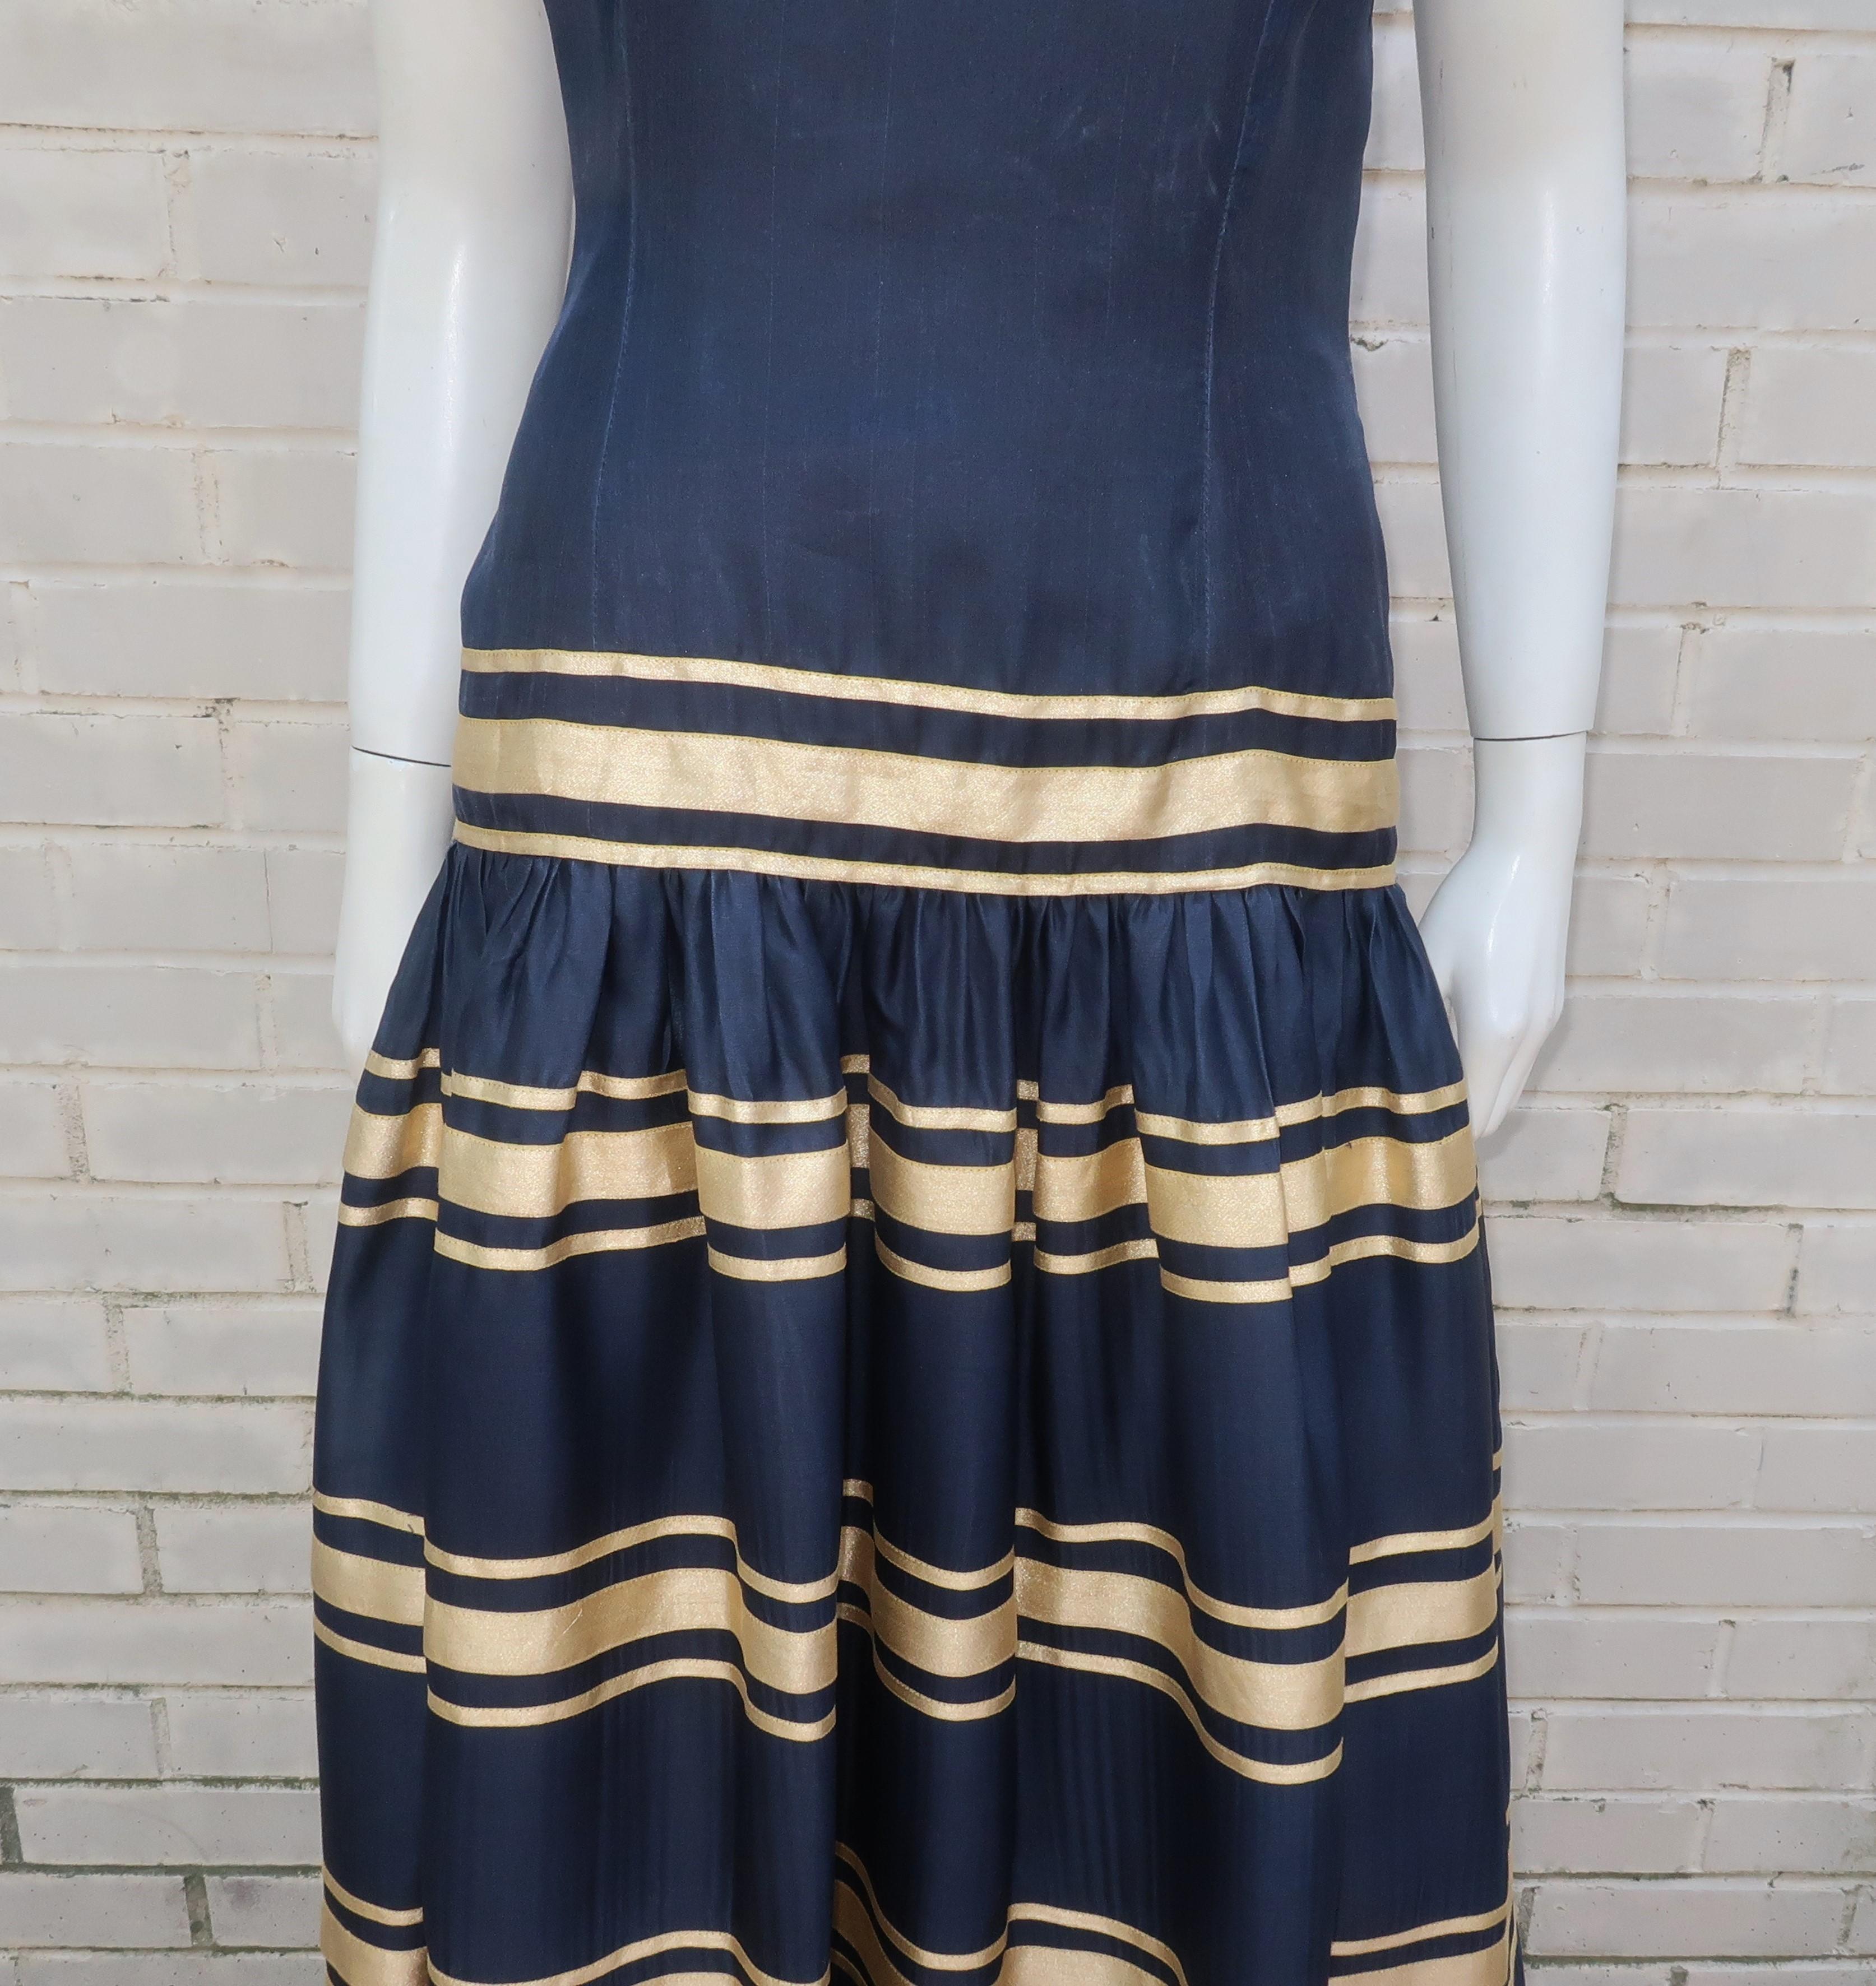 Black Albert Nipon Navy Blue Silk Organza Evening Dress With Gold Bows, 1980's For Sale